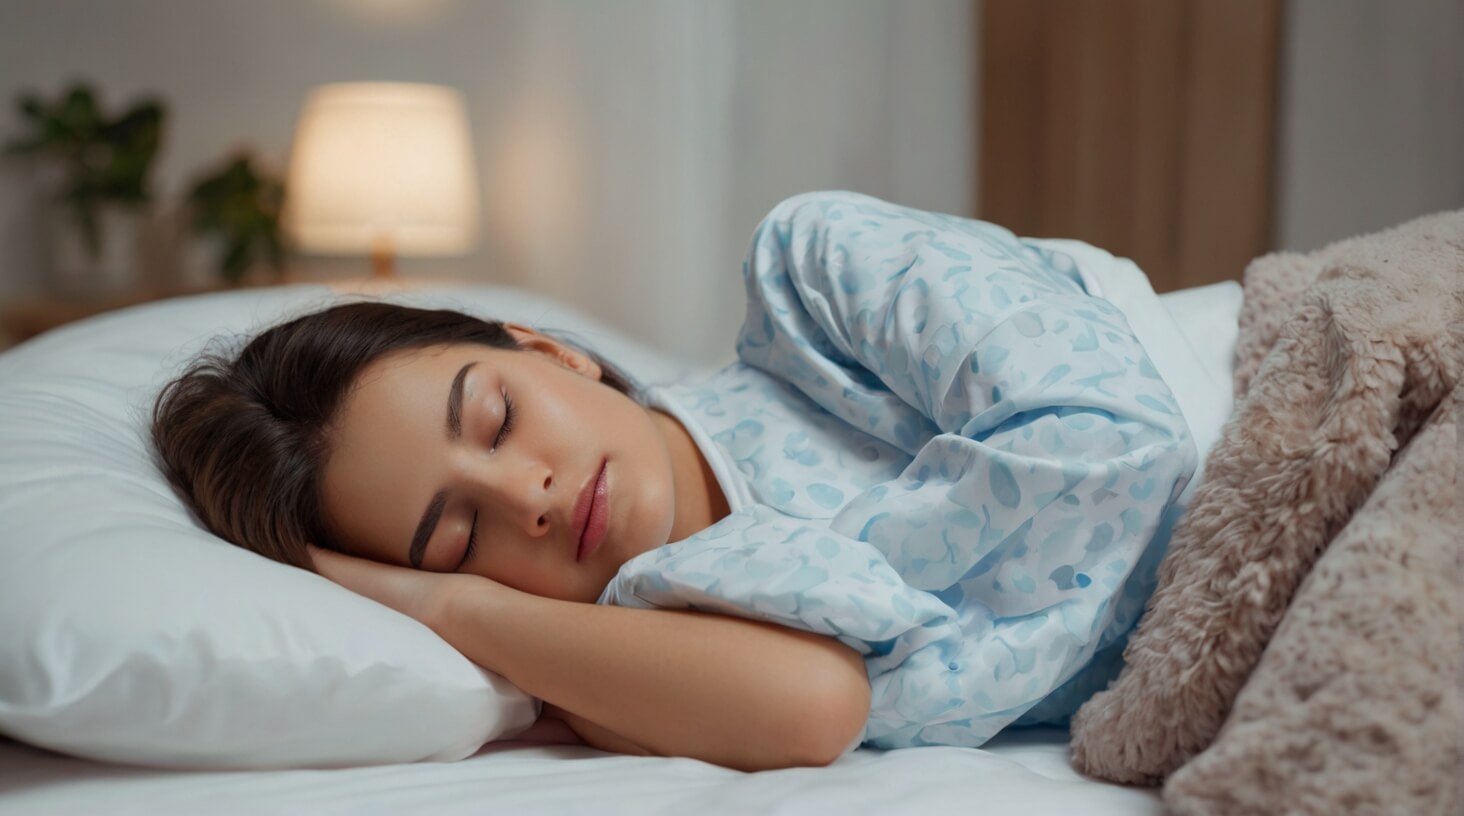 An image of a person peacefully sleeping, illustrating the importance of quality sleep for health and well-being.